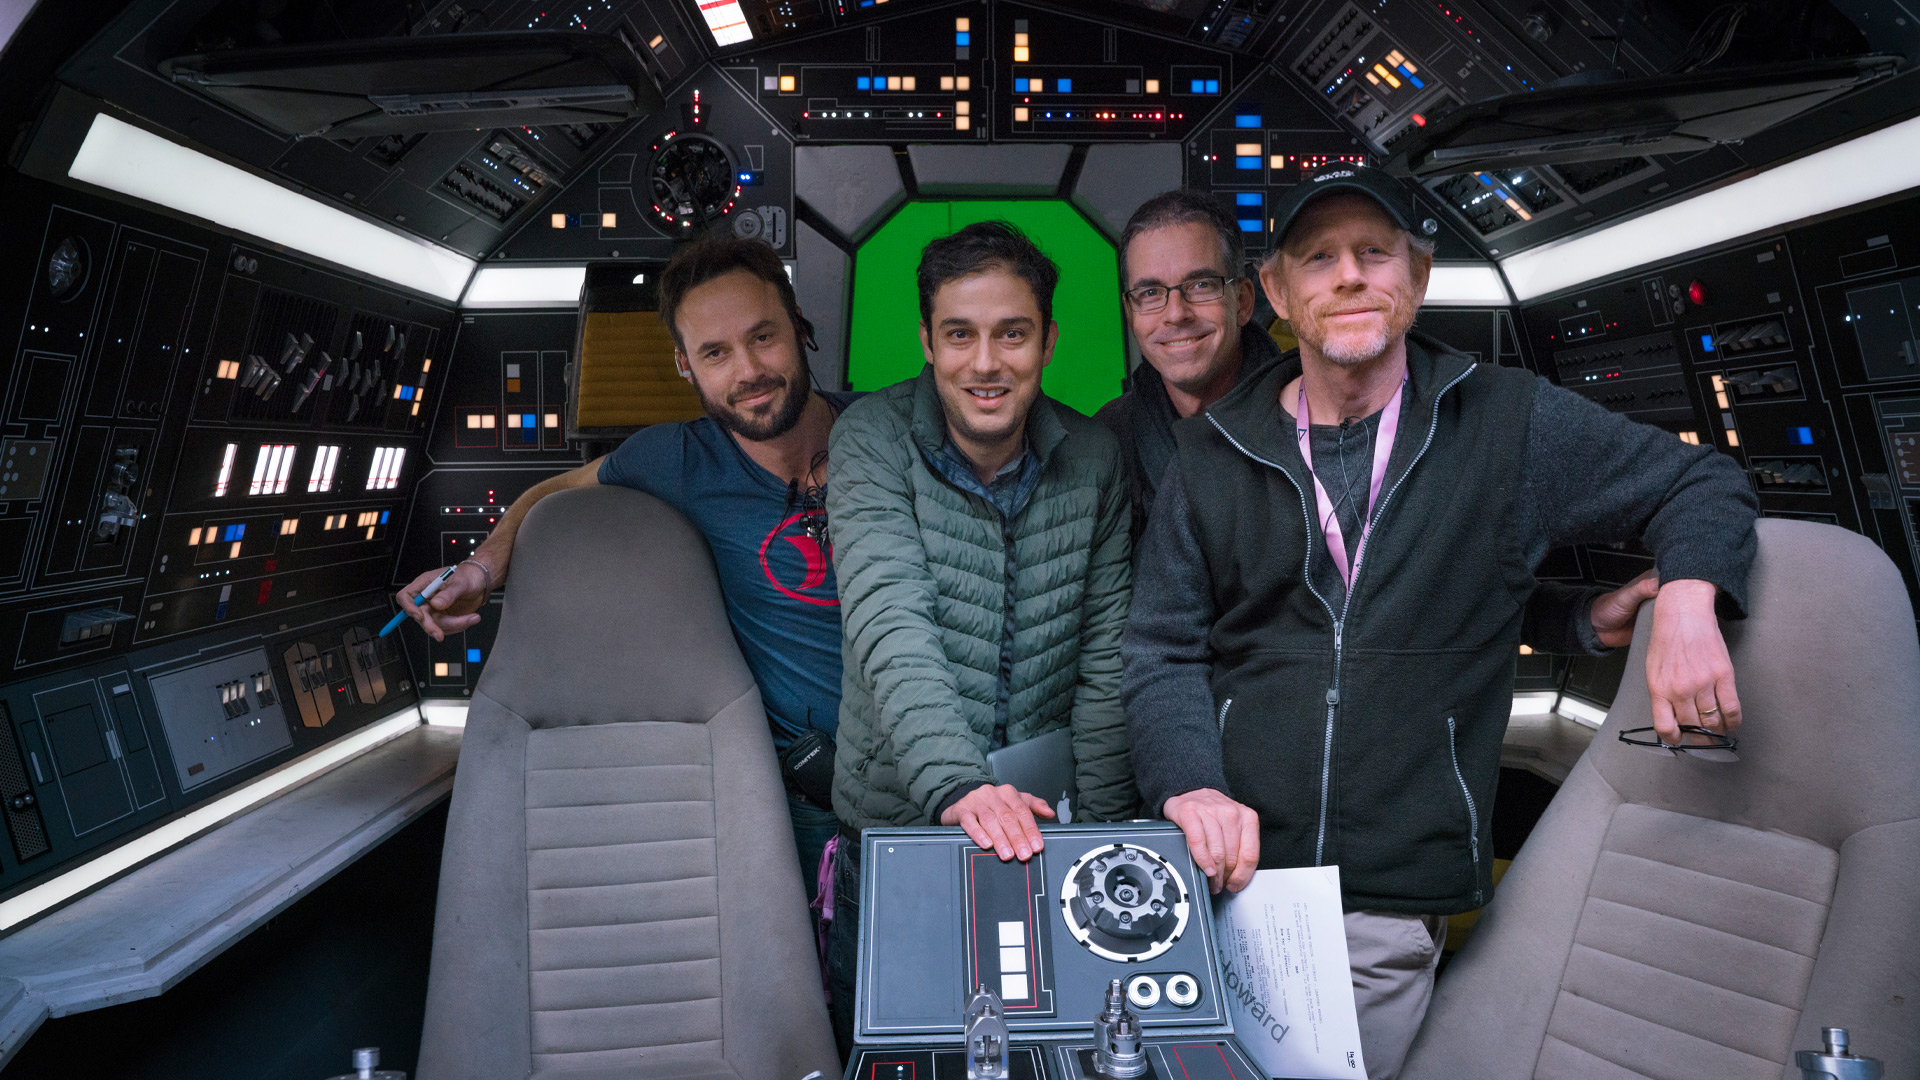 Ron Howard with Jon Kasdan in the Falcon the set of Solo